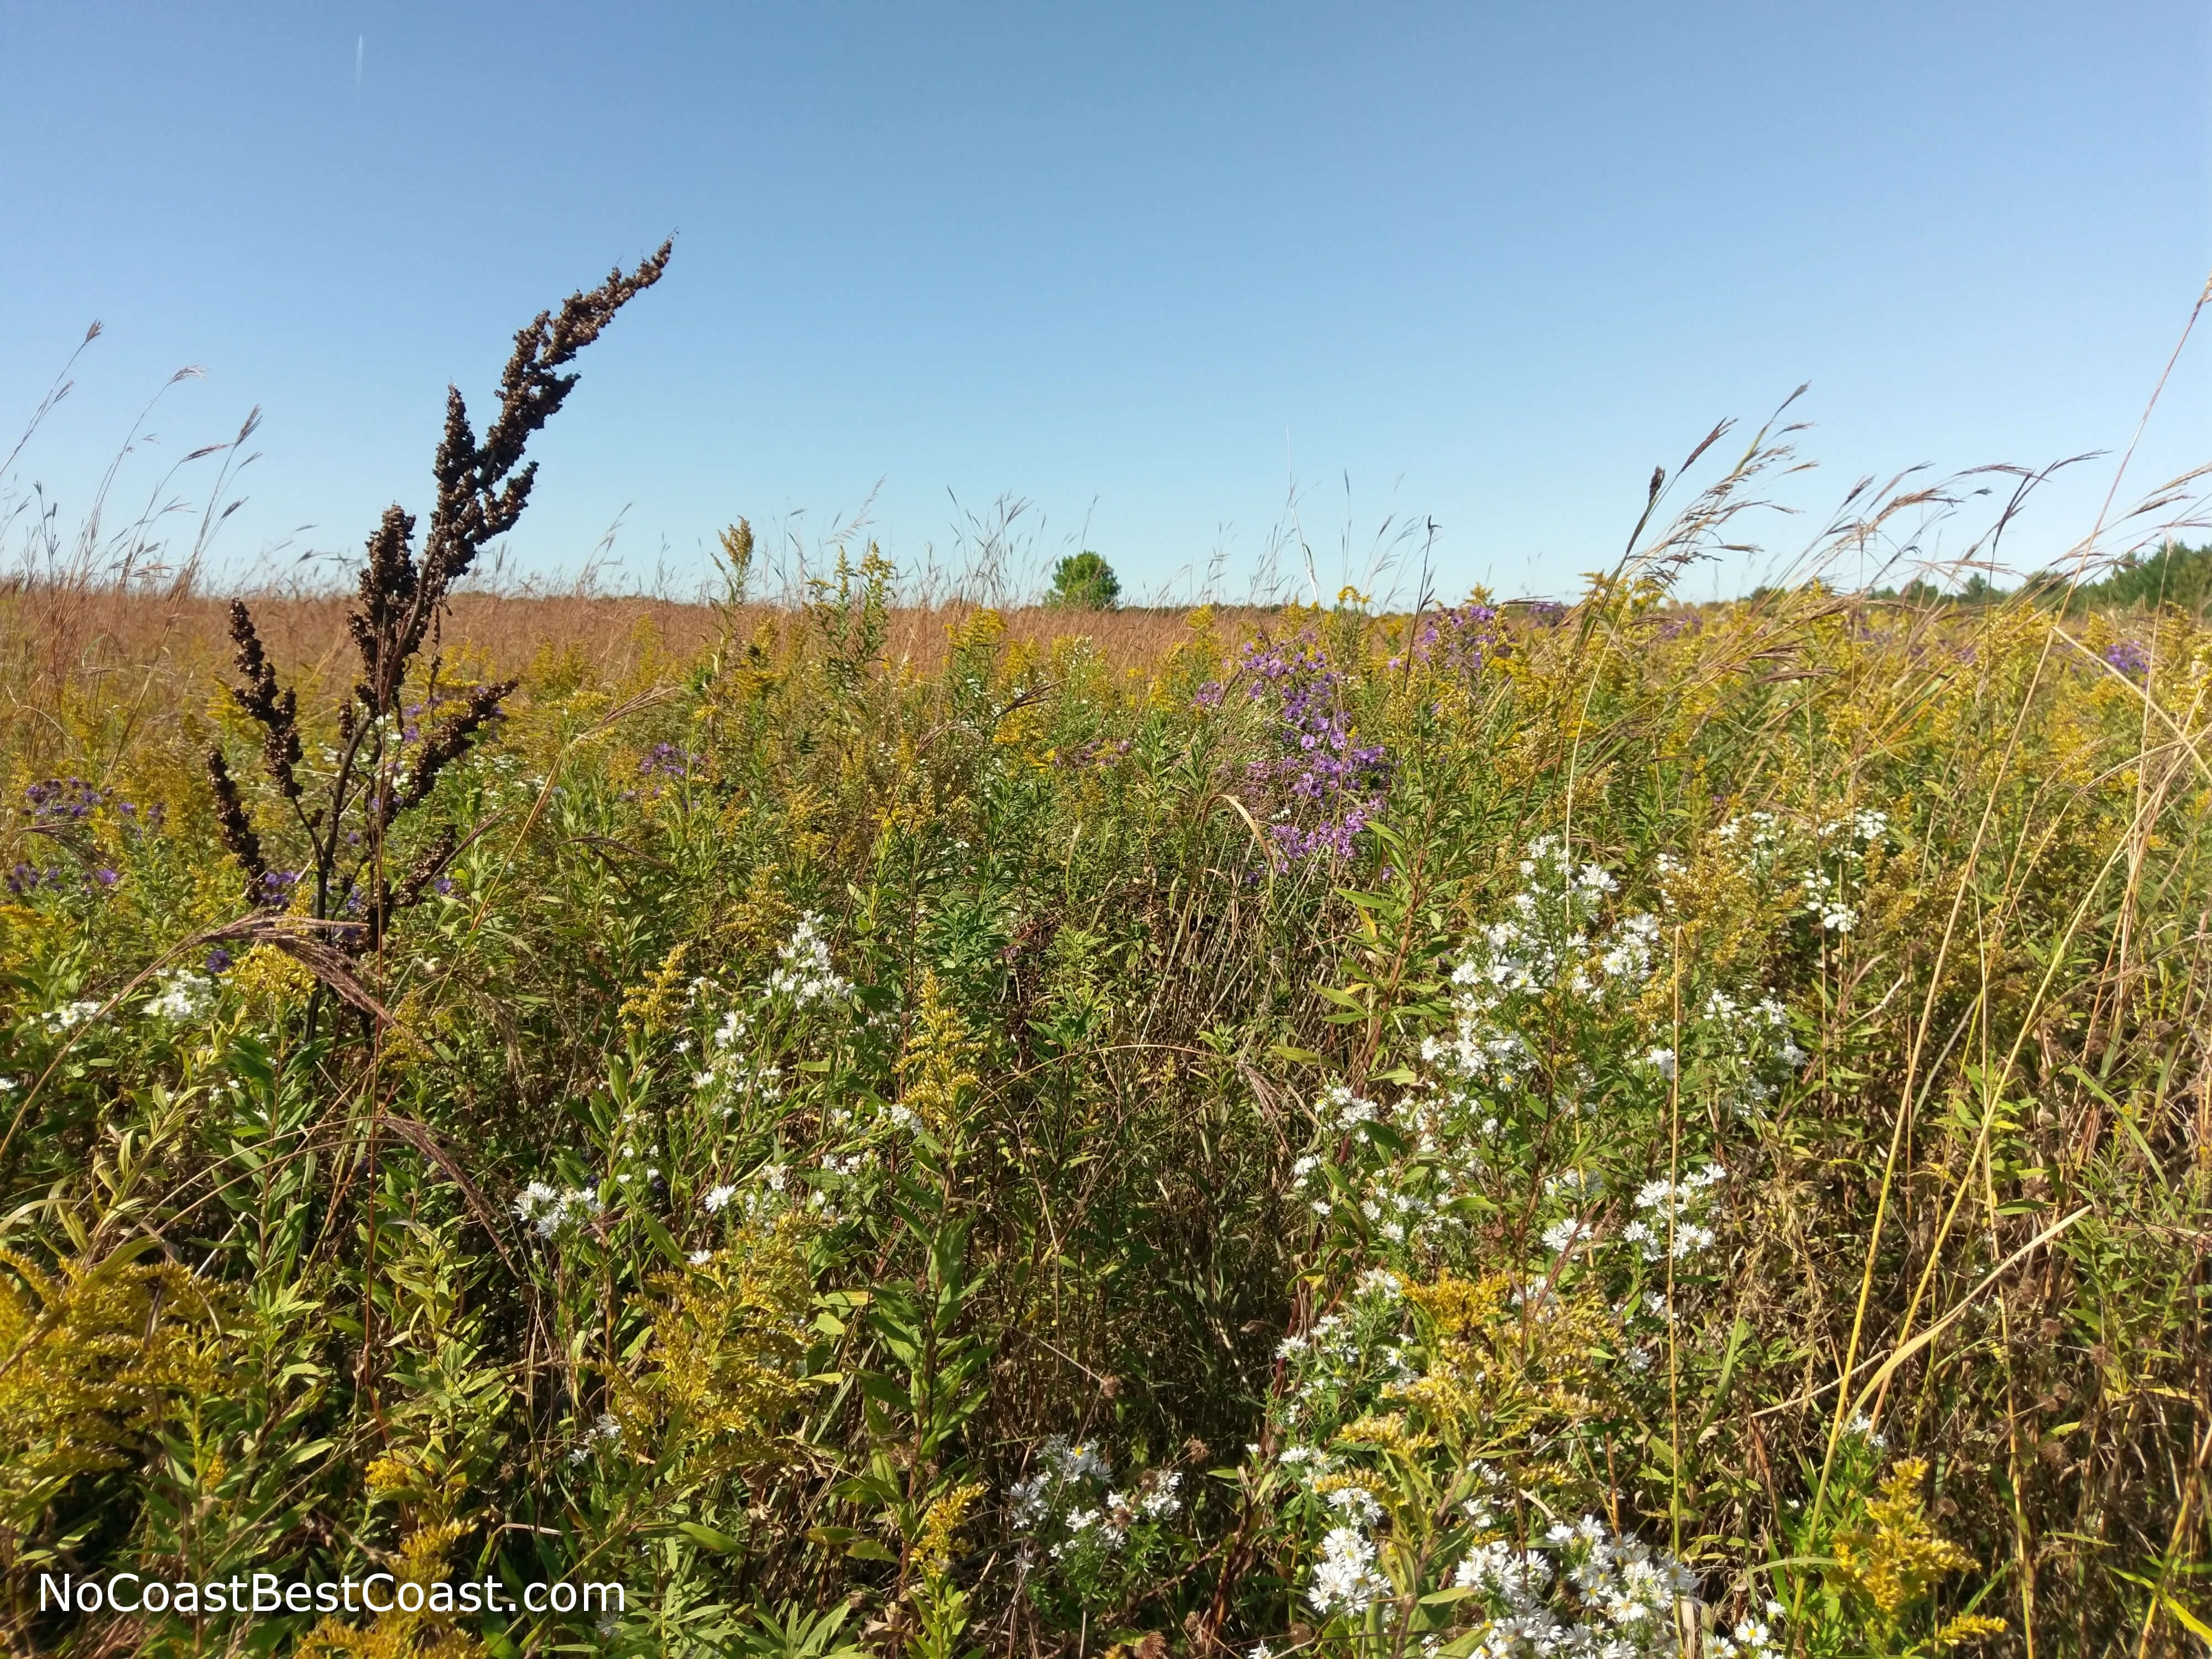 The killer prairie flower combo of white daisies, purple asters, and goldenrod goldenrods